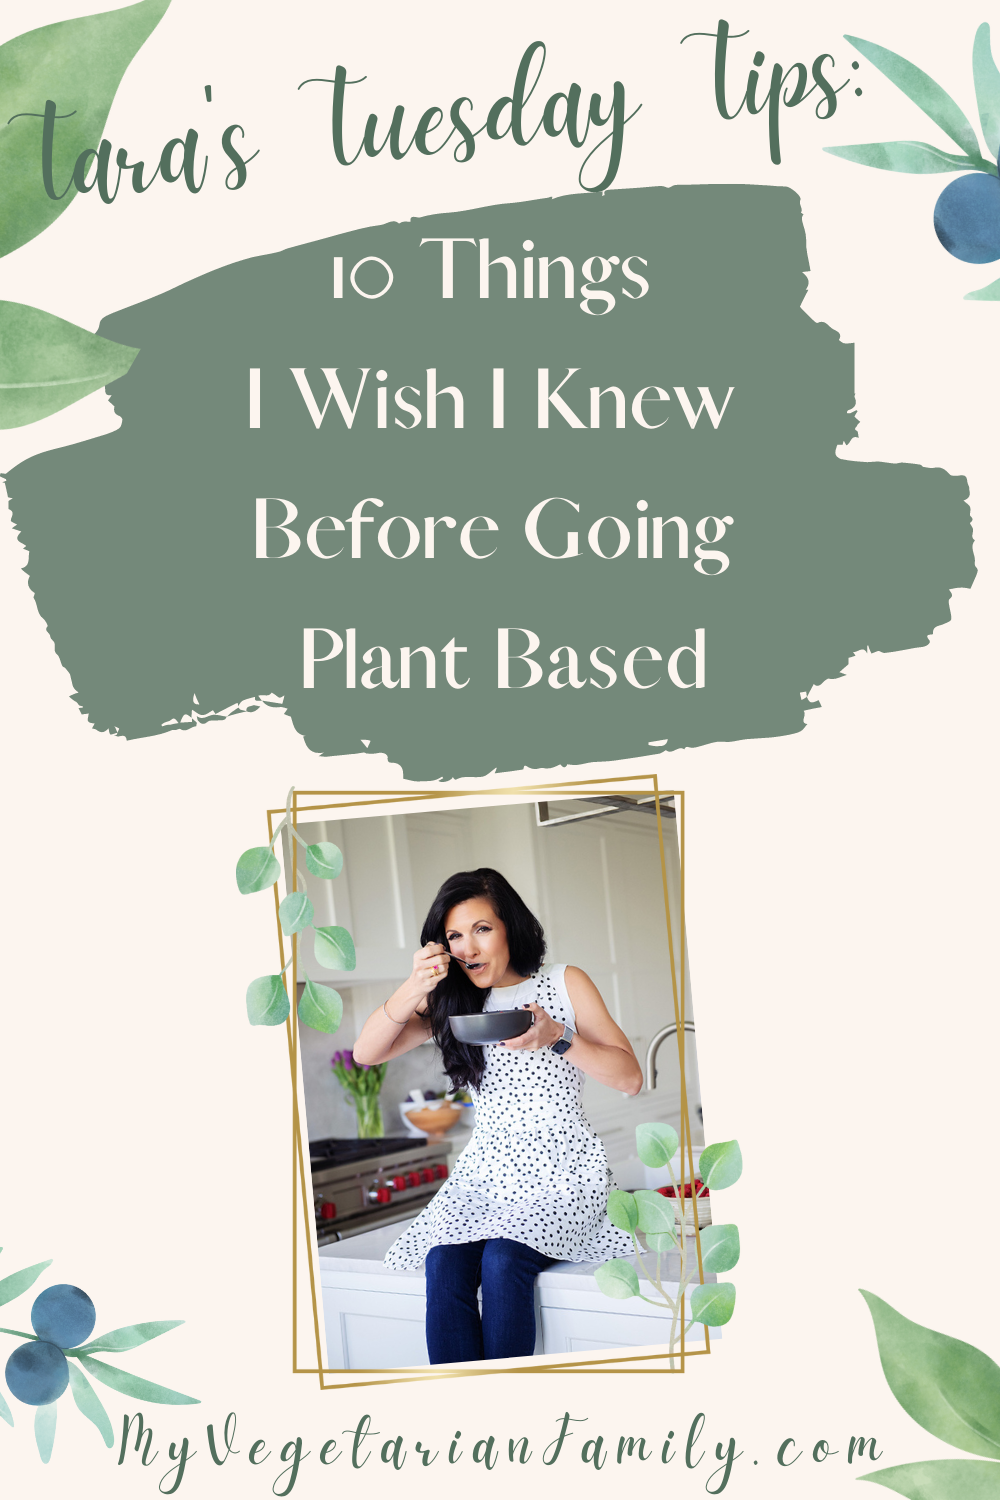 10 Things I Wish I Knew Before Going Plant Based | Tara's Tuesday Tips | My Vegetarian Family #nutritiontips #plantbasedtips